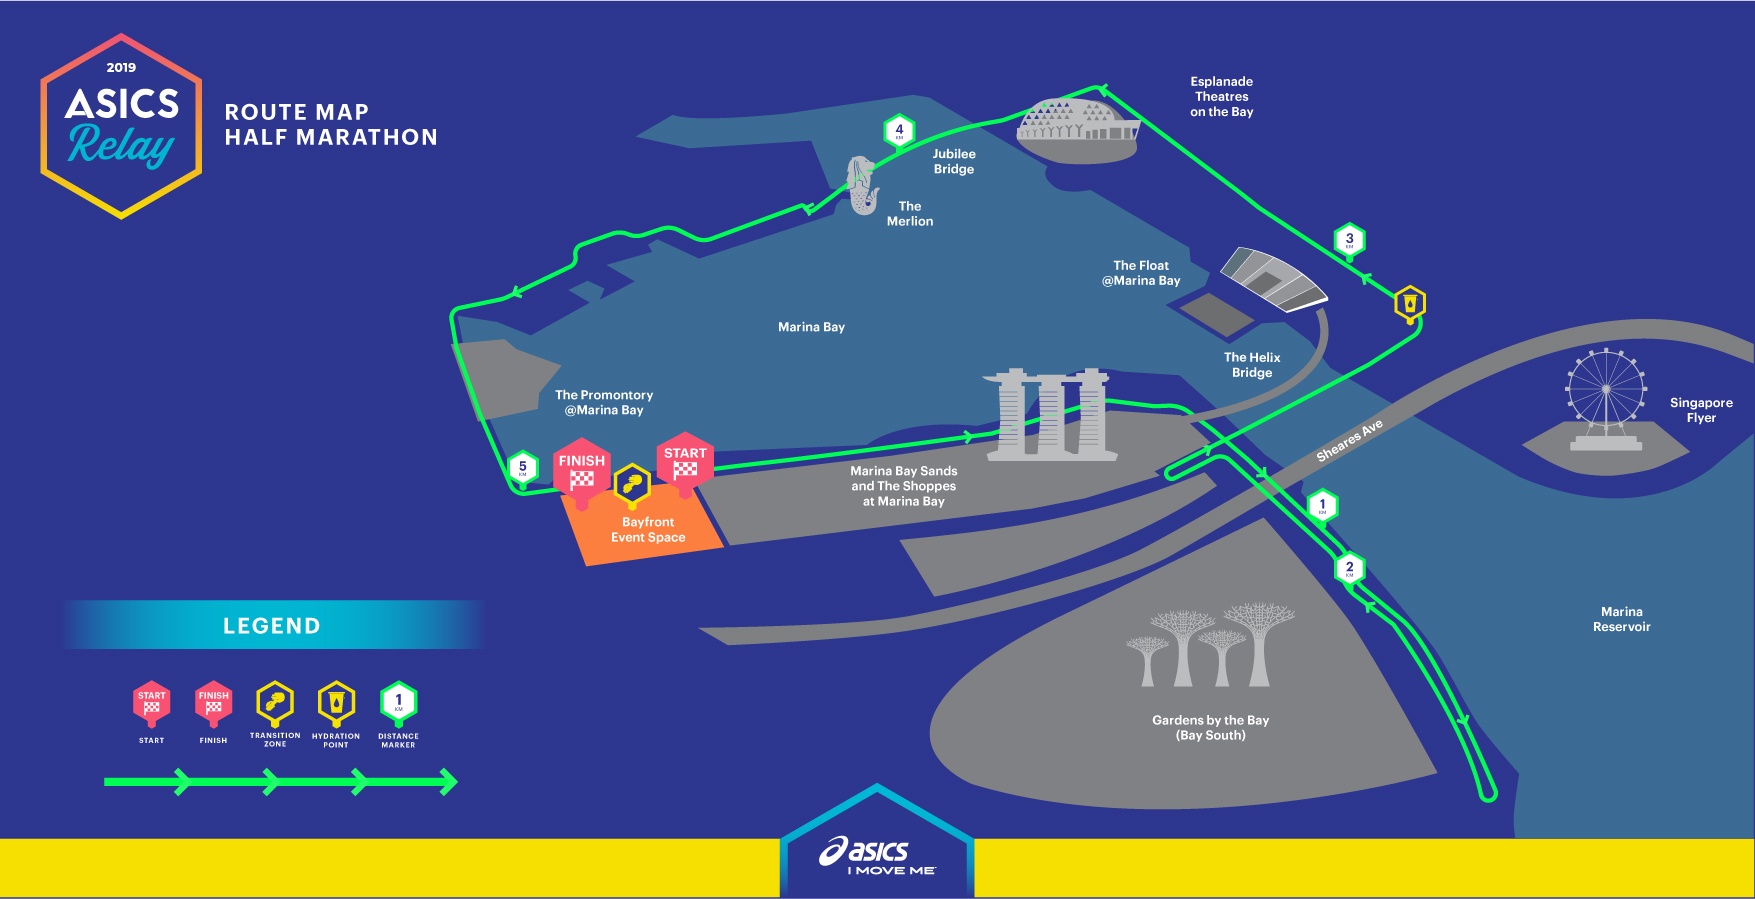 ASICS Relay 2019_Maps_17 OCT_Route Map - Half